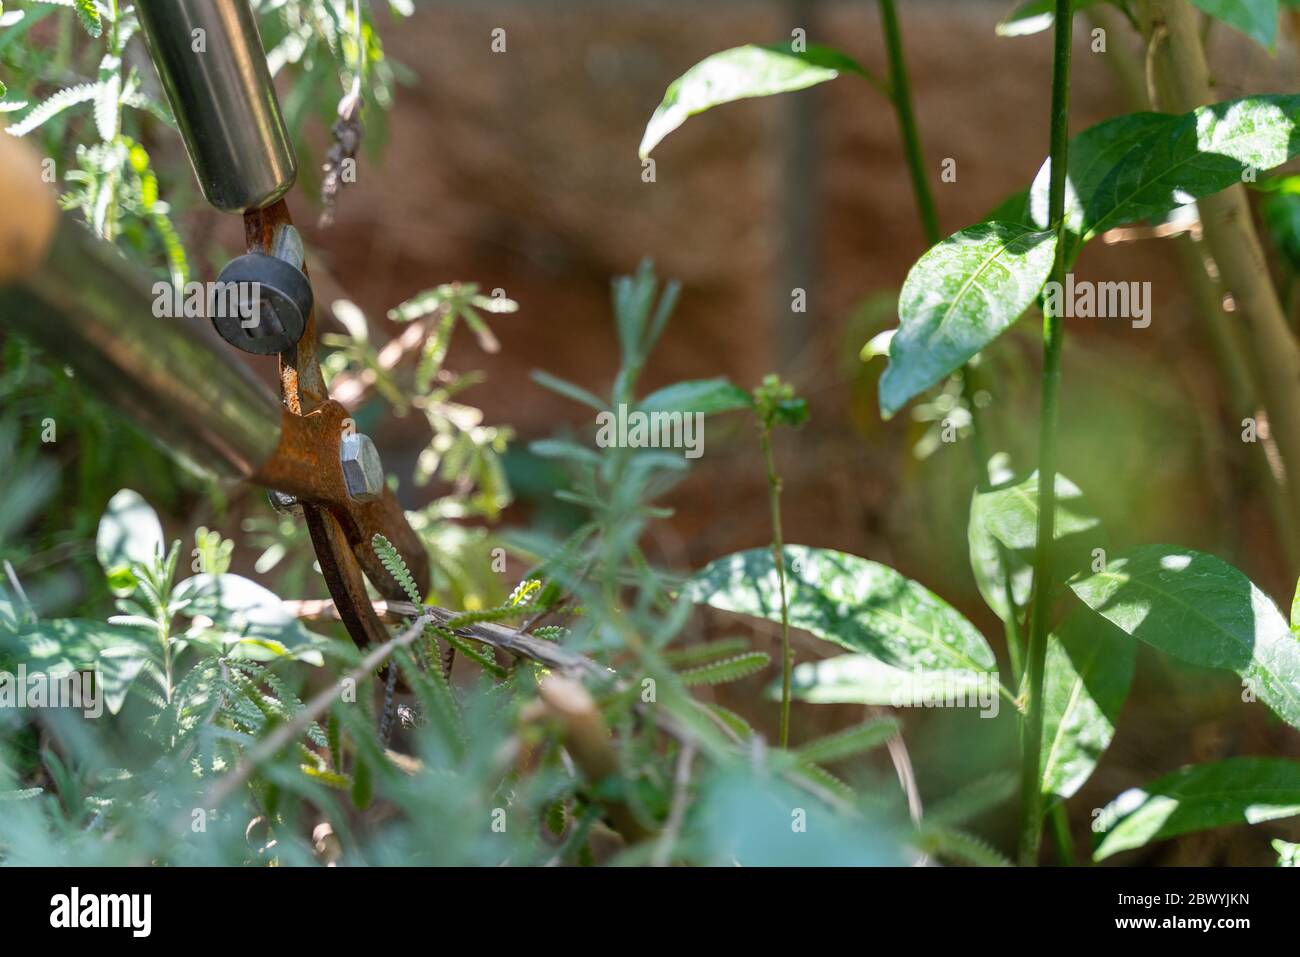 Pruning plants of home garden Stock Photo